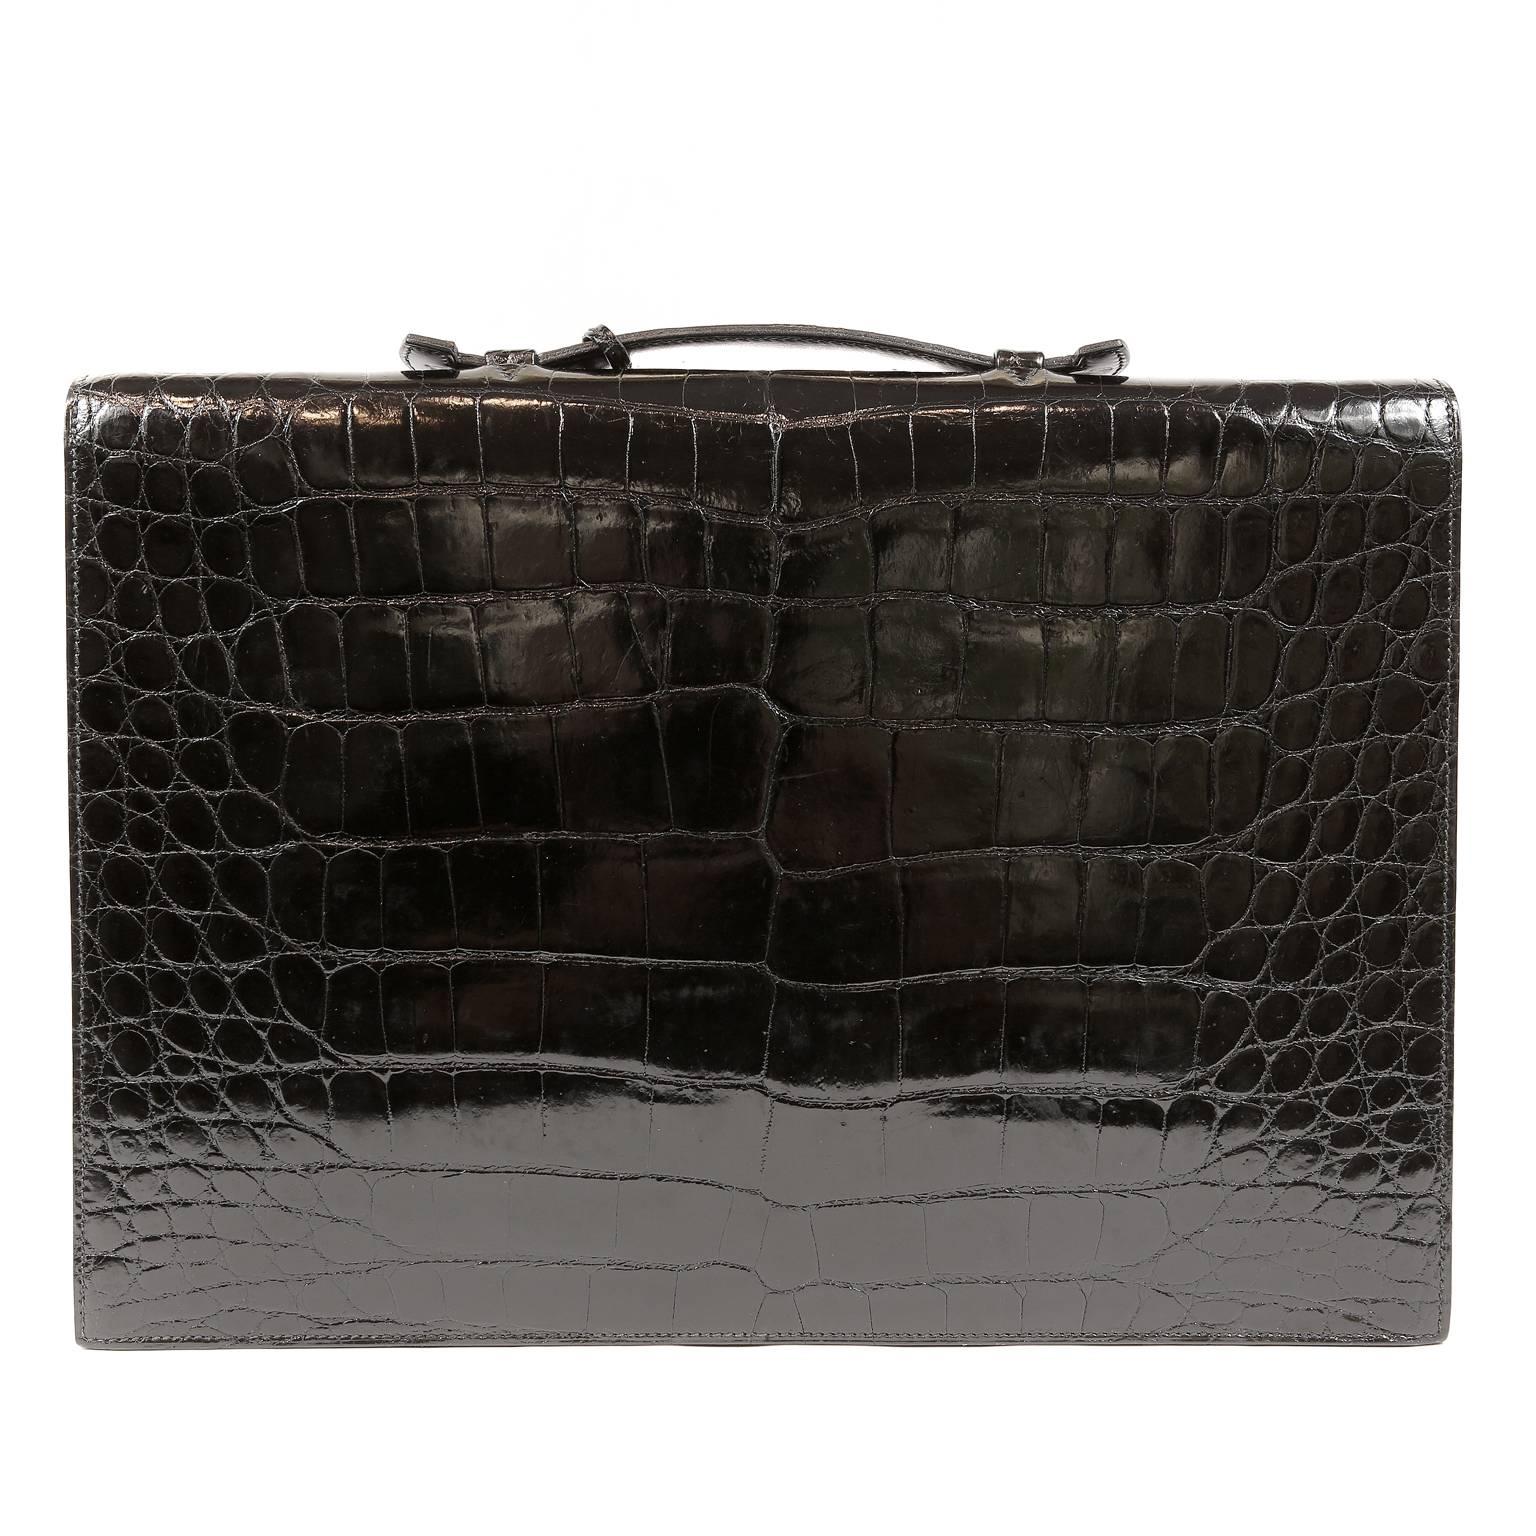 This authentic Hermès Black Porosus Crocodile Briefcase is in MINT condition. Everything about this piece exudes exquisite taste and opulence.  
Shiny black crocodile skin slim briefcase with gold hardware clasp.  Single top handle.  Black leather